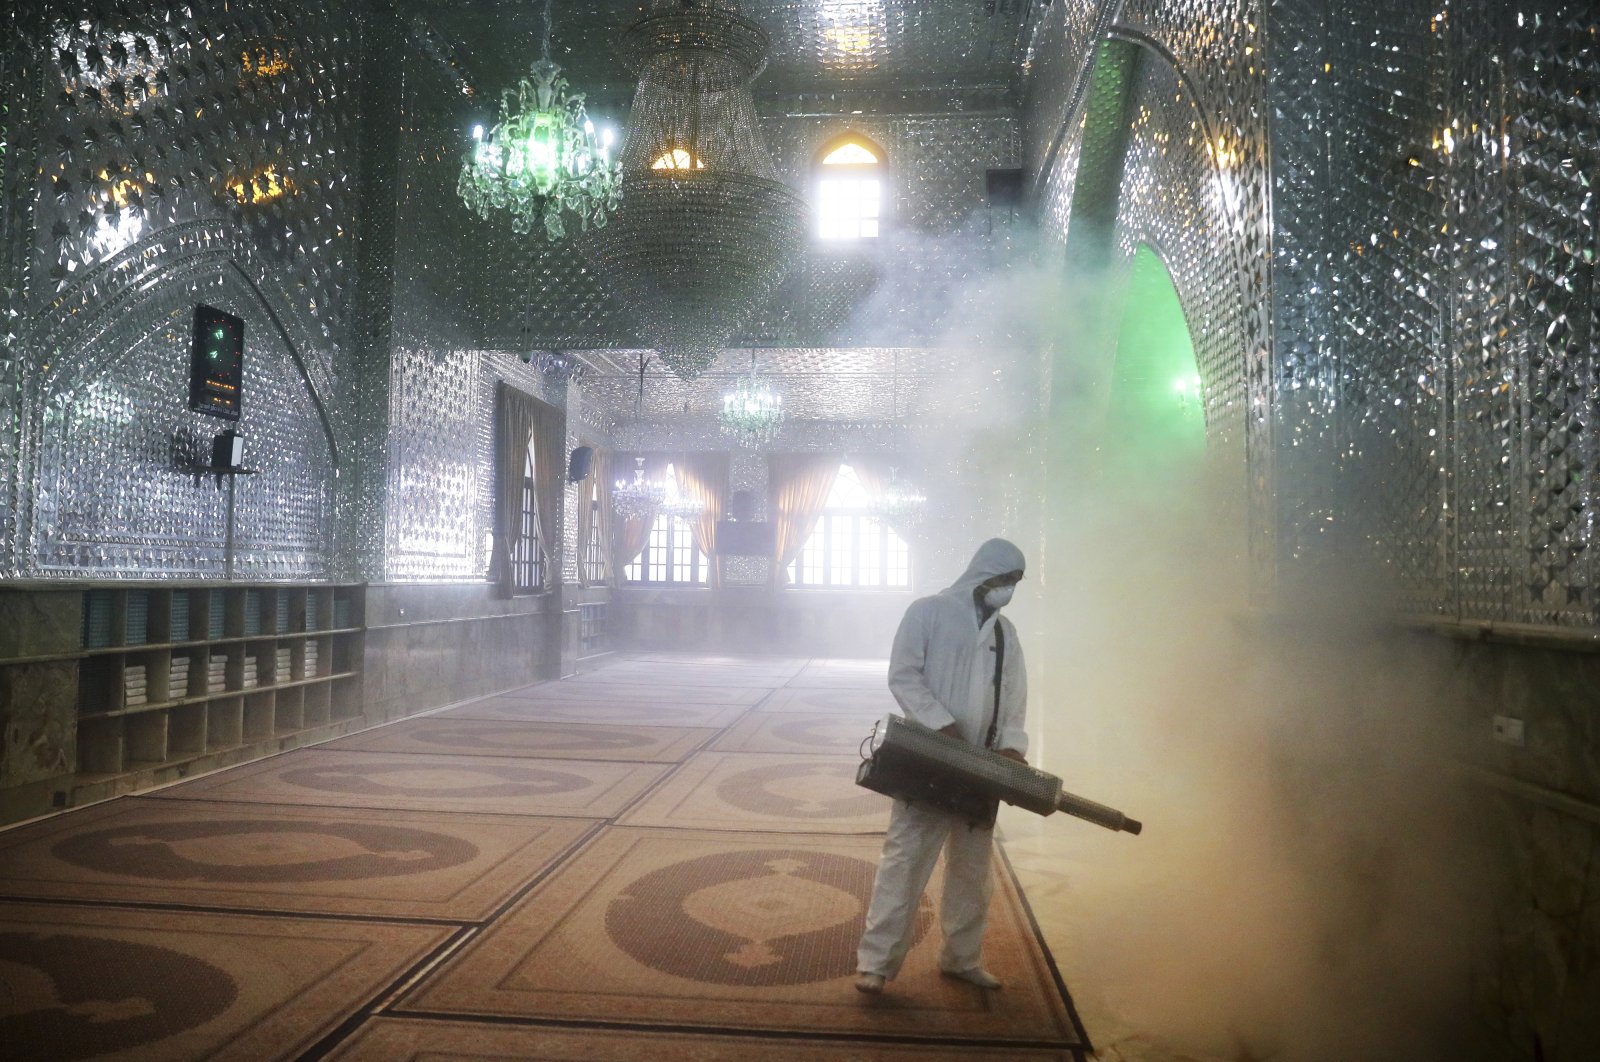 A firefighter disinfects the shrine of Saint Saleh to help prevent the spread of the new coronavirus in northern Tehran, Iran, Friday, March, 6, 2020. (AP Photo)